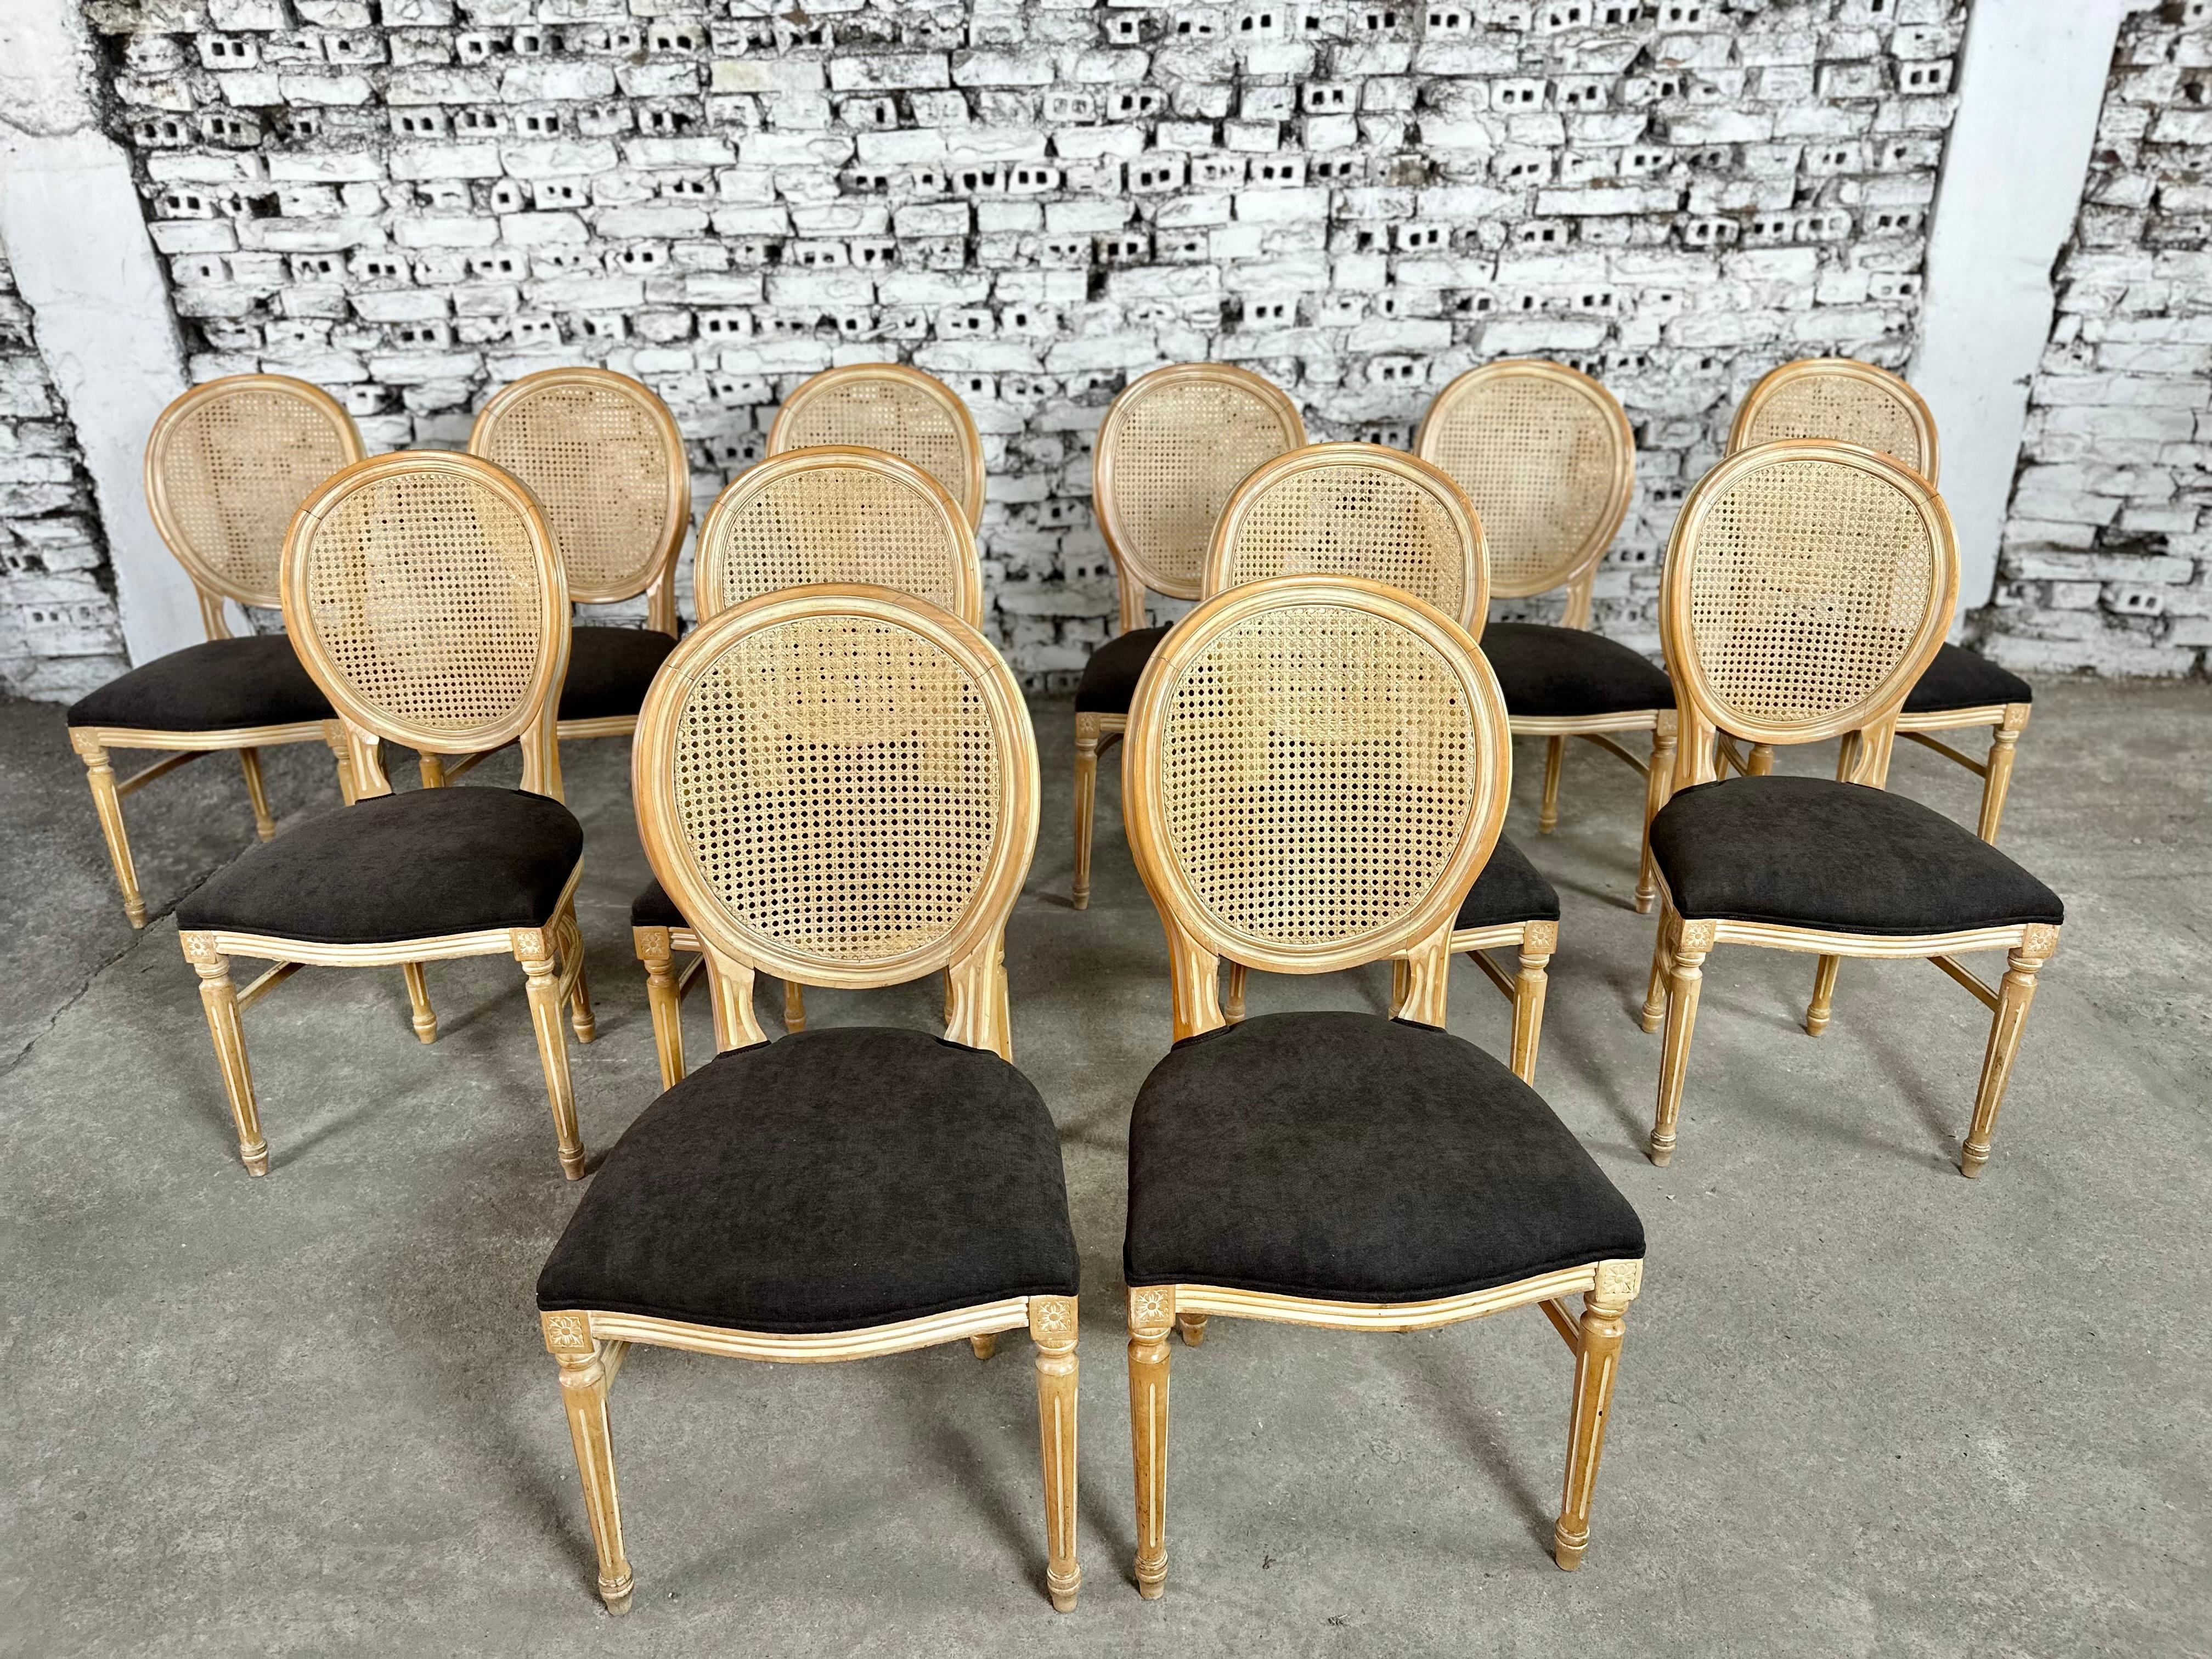 20th Century Louis XVI Medallion Cane Back Dining Chairs, Reupholstered - Set of 12